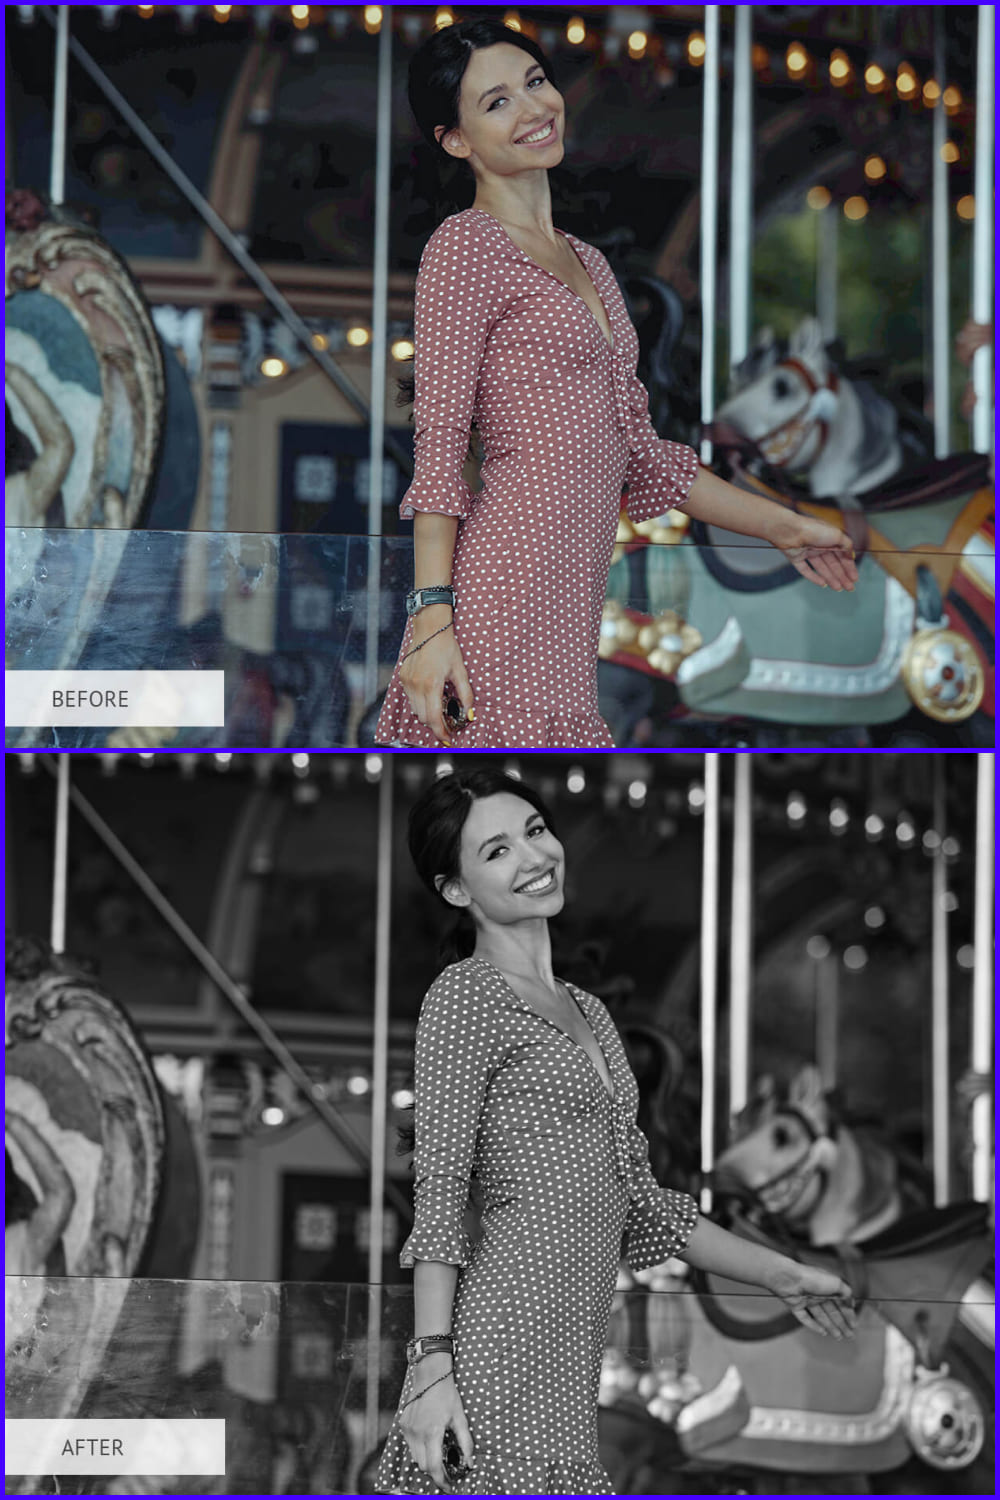 A collage of photos of a girl at the carousel in color and b/w.